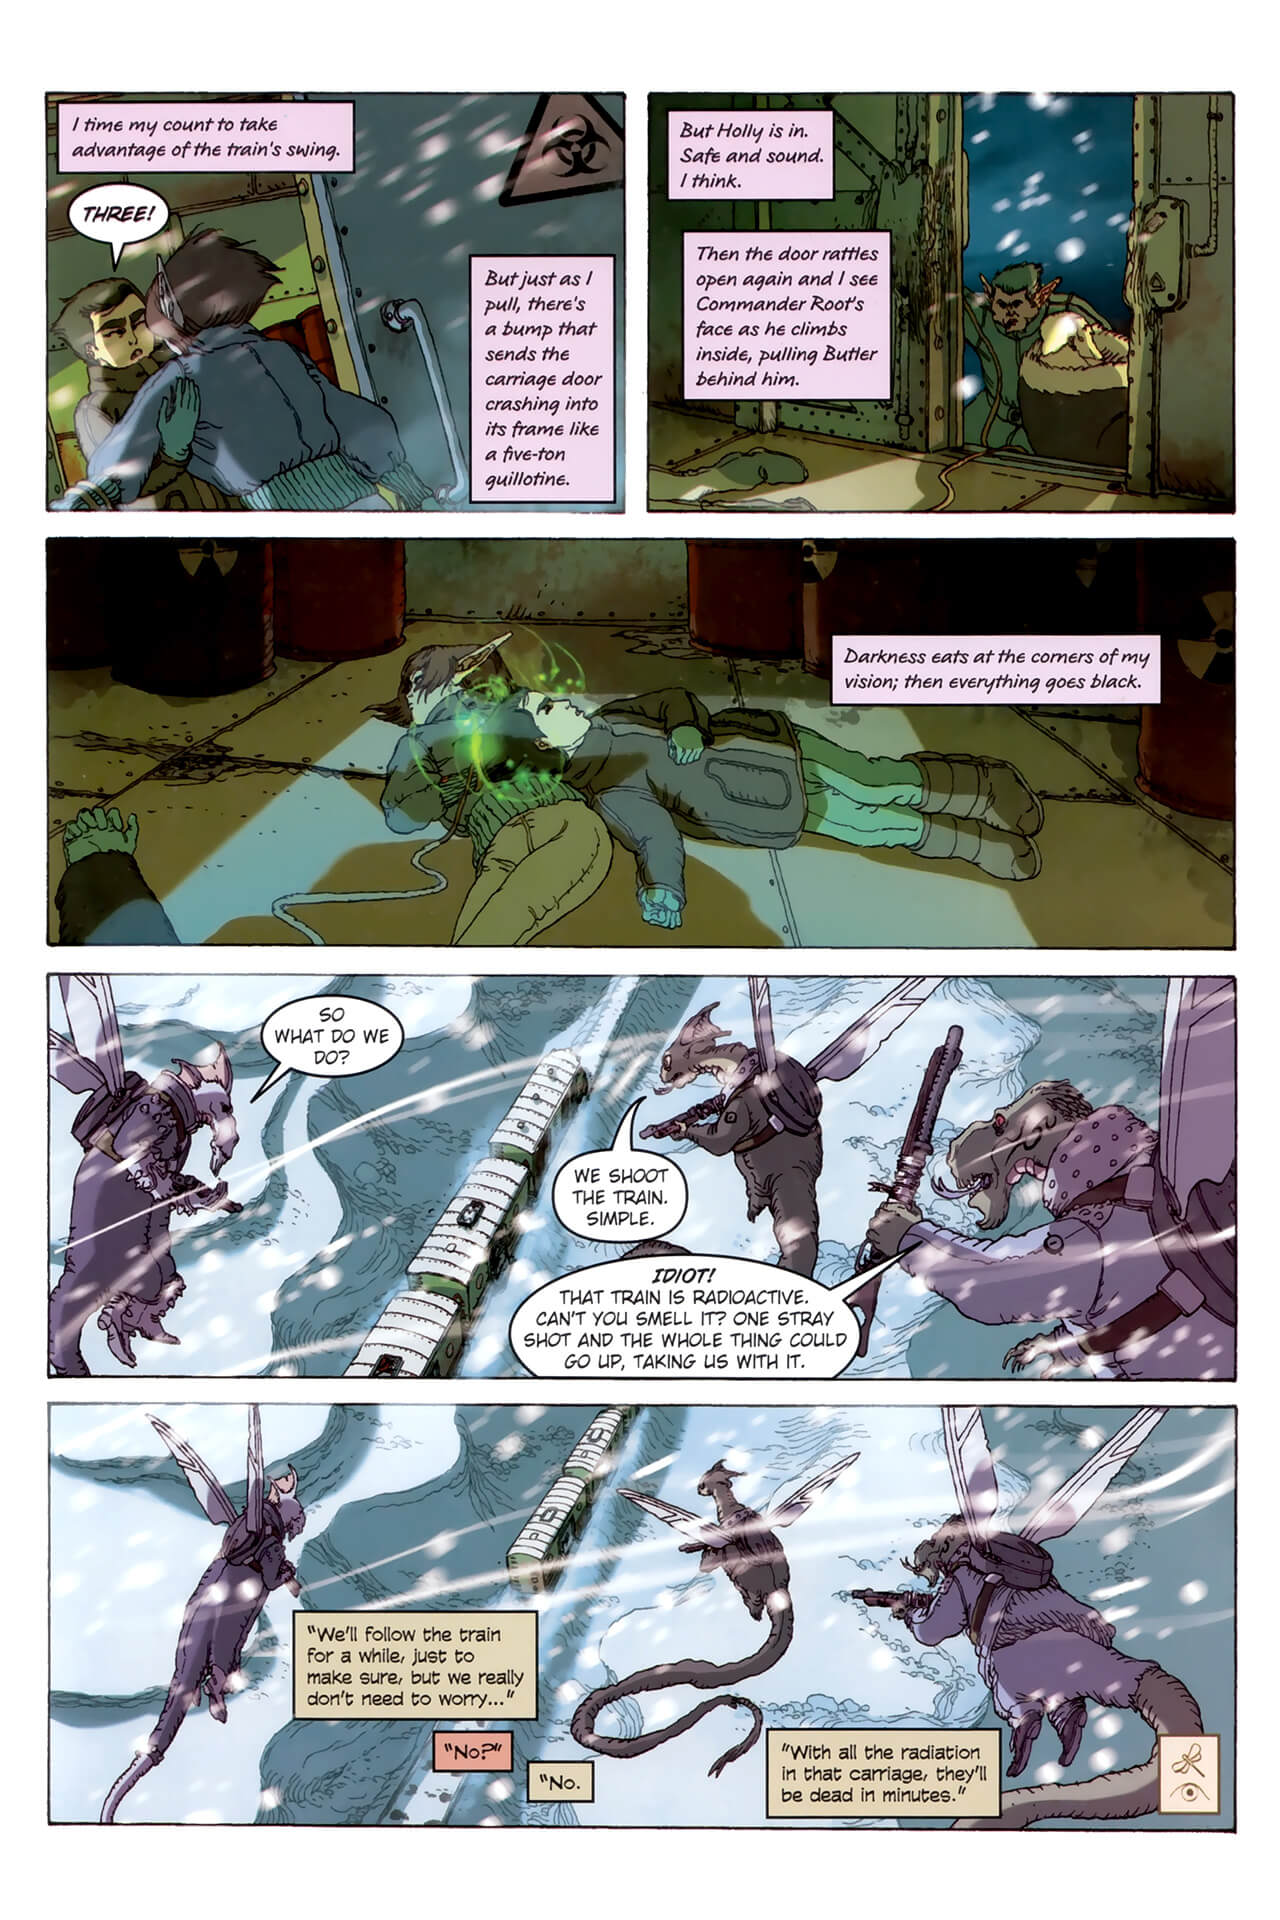 page 63 of artemis fowl the arctic incident graphic novel